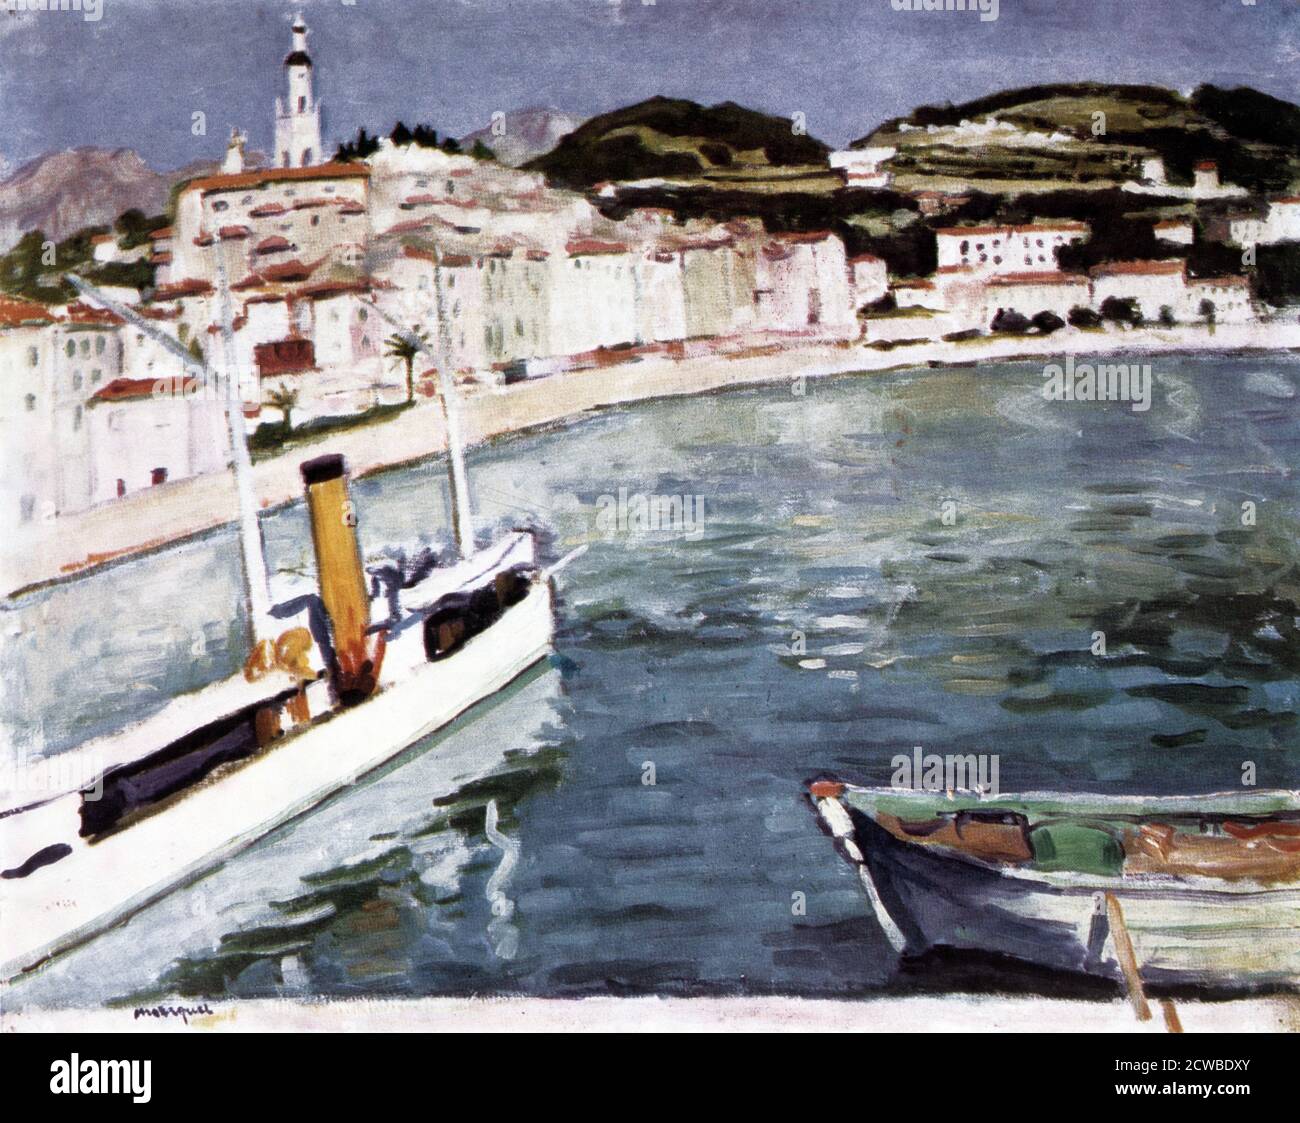 Harbour at Menton' , 1905 Artist: Albert Marquet. Albert Marquet(1875-1947) was born in Bordeaux, France. He was both very young and very poor when he went to Paris to study at the School of Decorative Arts under Gustave Moreau. Stock Photo